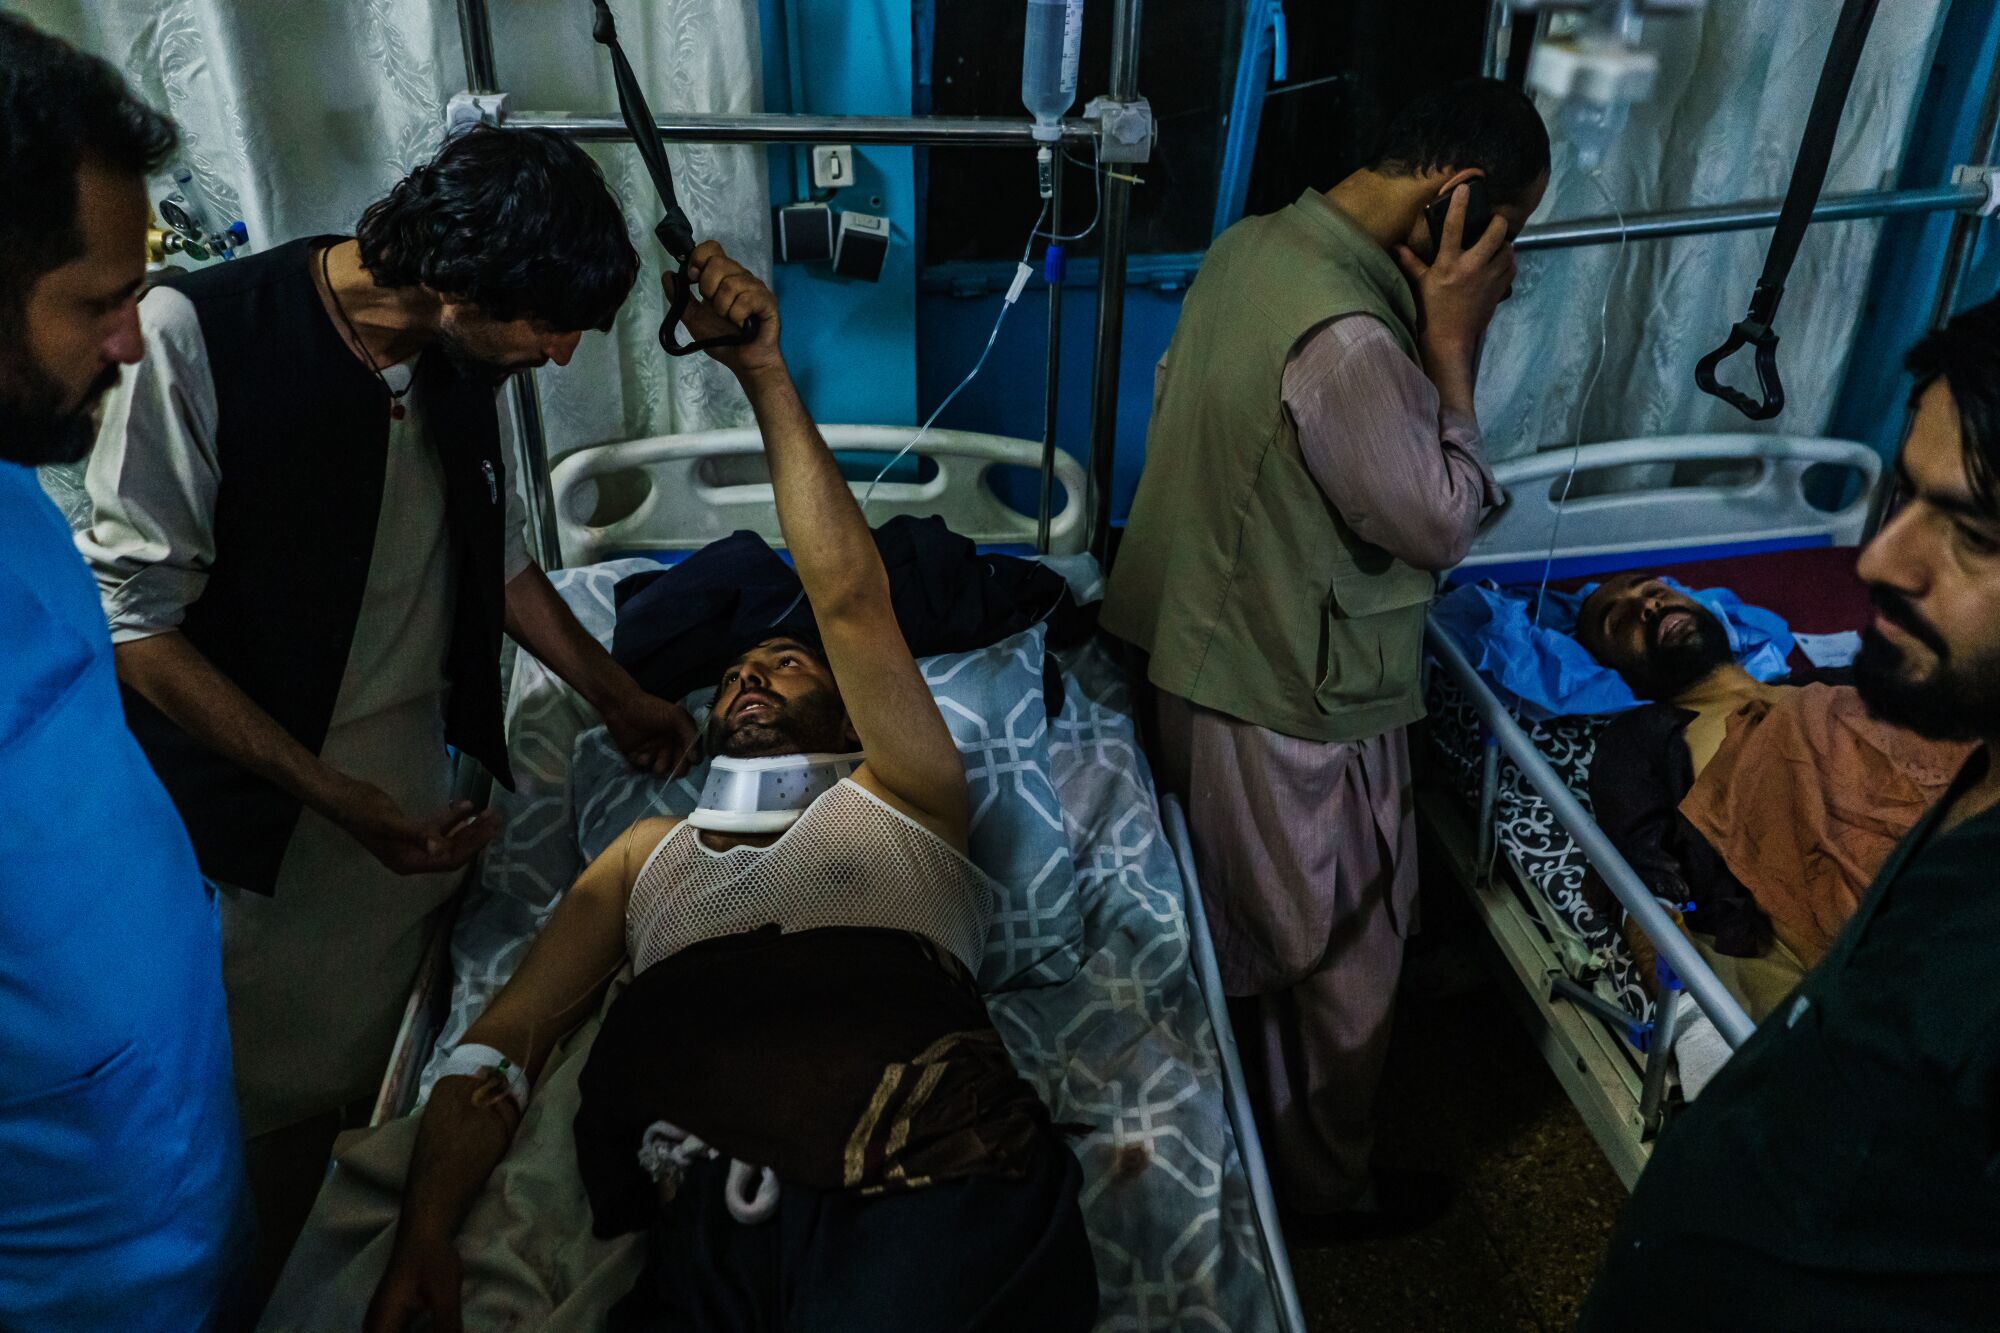 Family members visit wounded patients who have been admitted into Wazir Akbar Khan Hospital